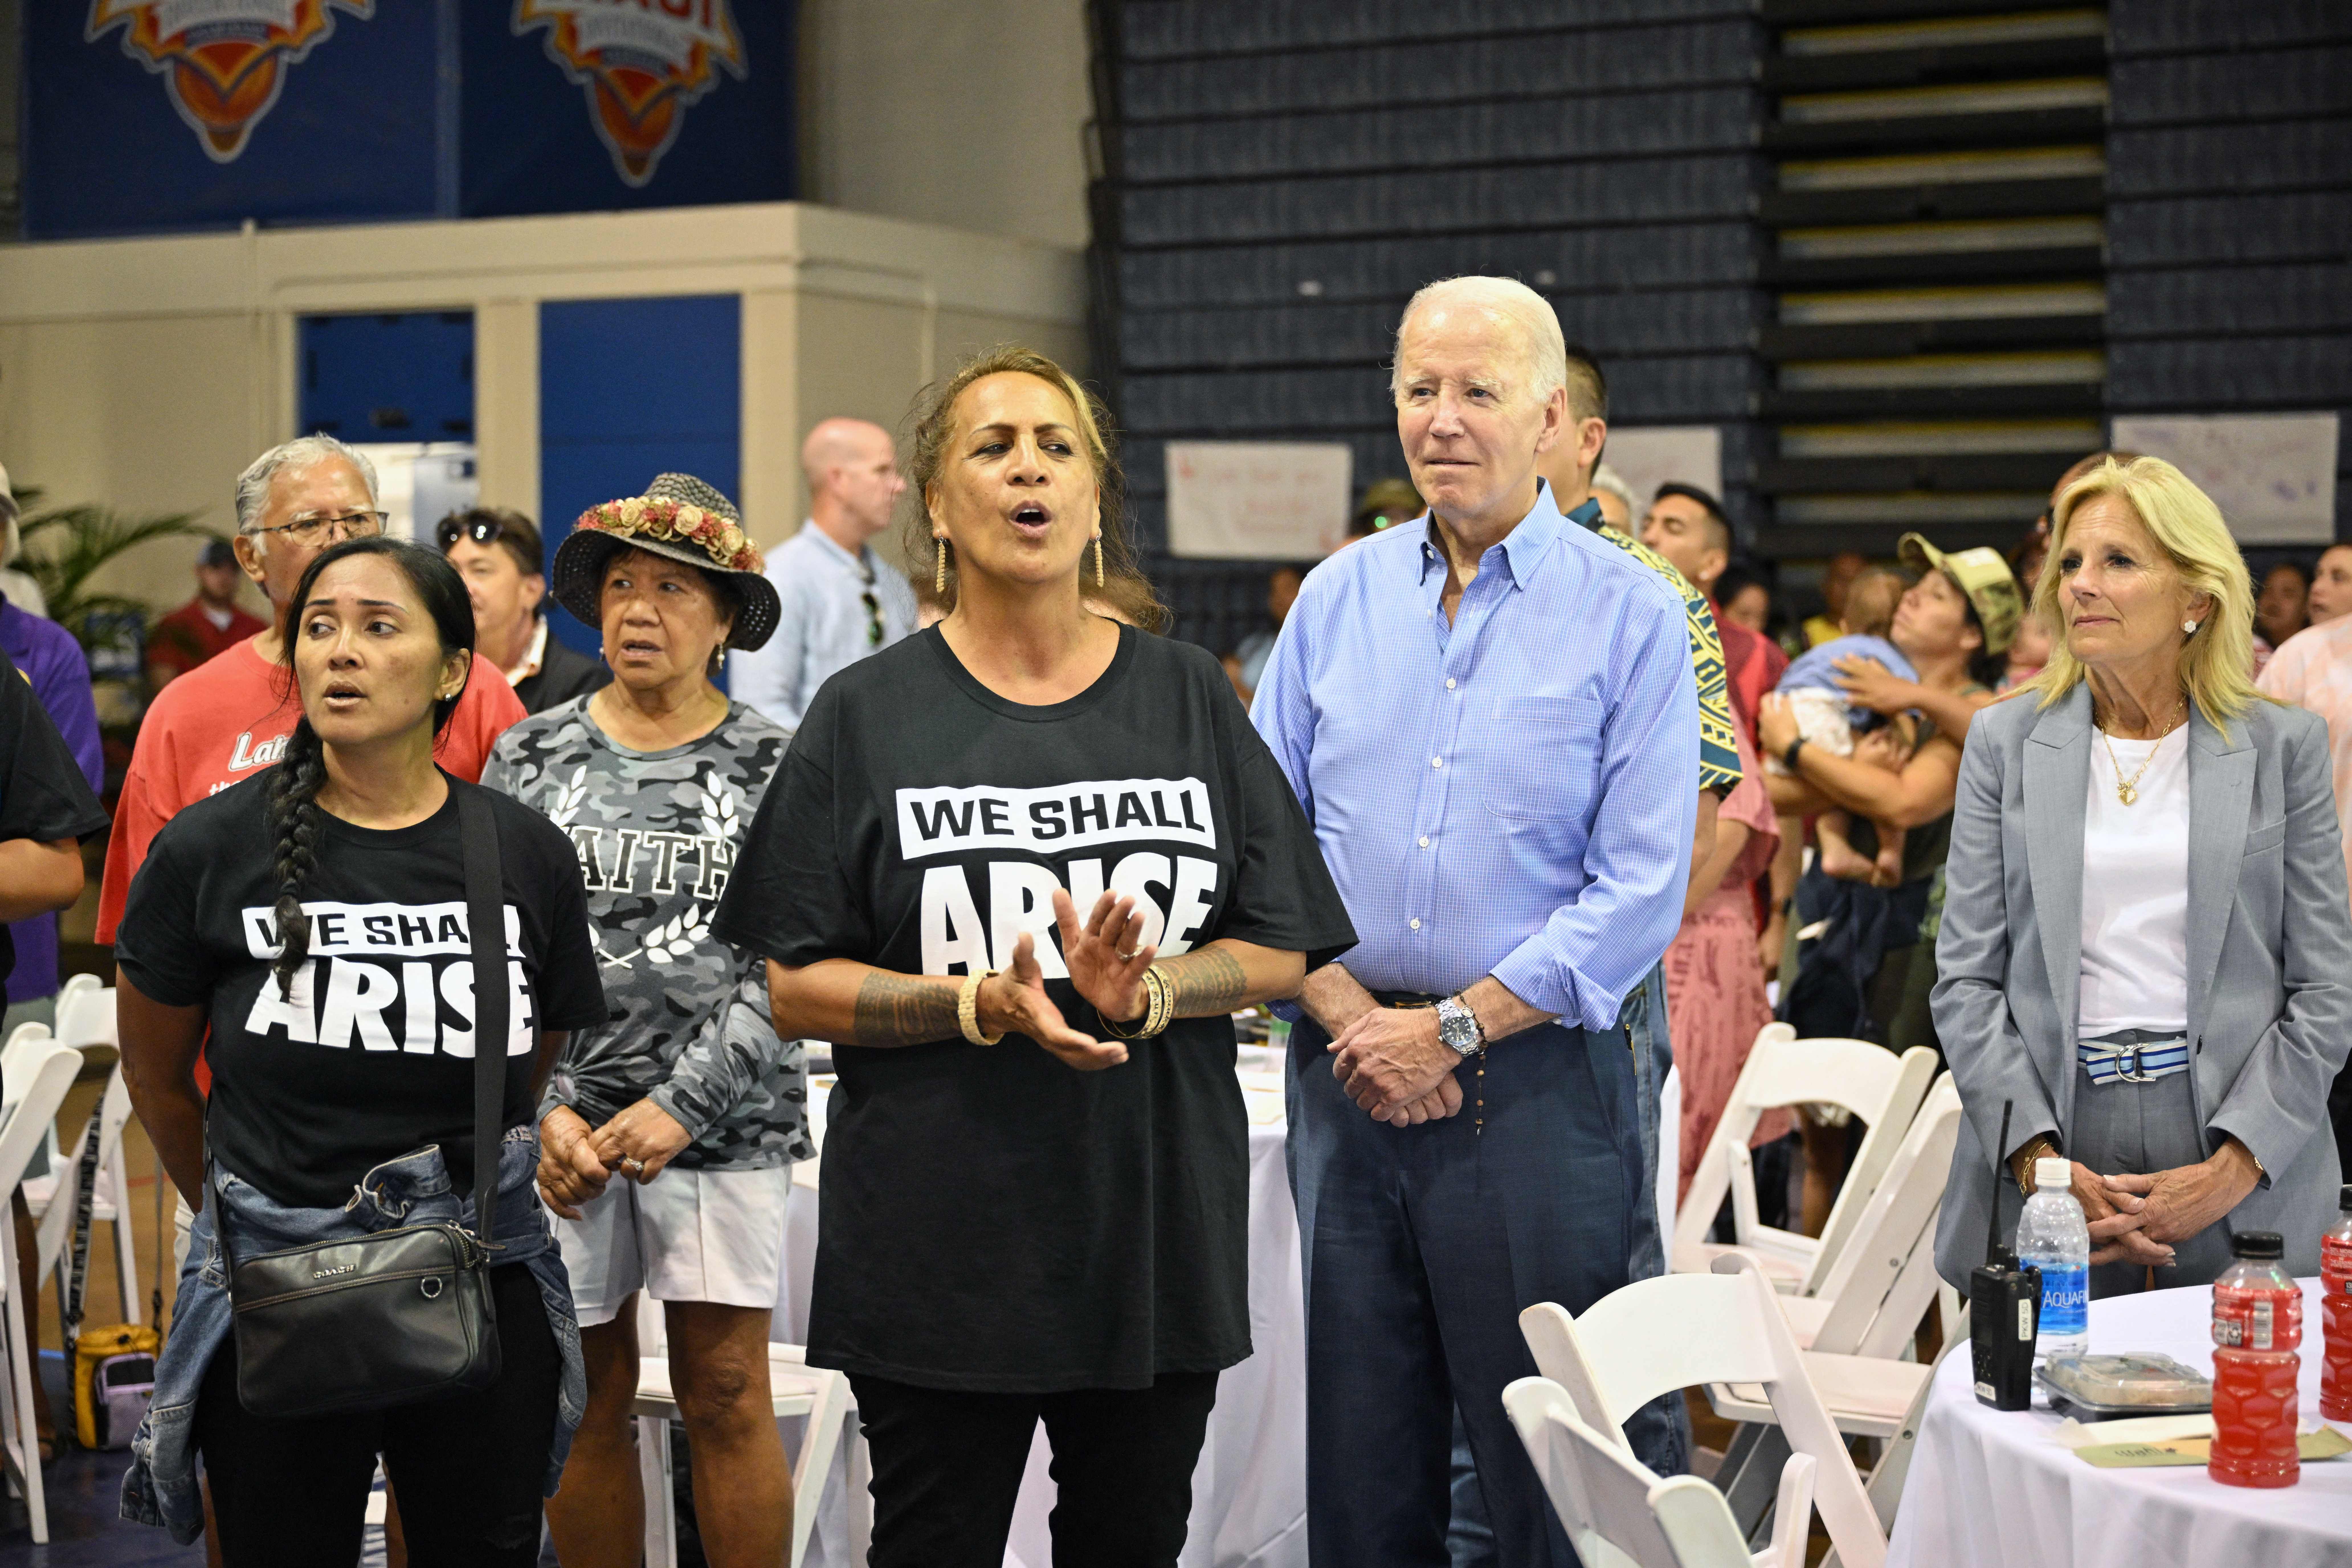 US President Joe Biden and First Lady Jill Biden attend a community engagement event at the Lahaina Civic Center in Lahaina, Hawaii on August 21, 2023.